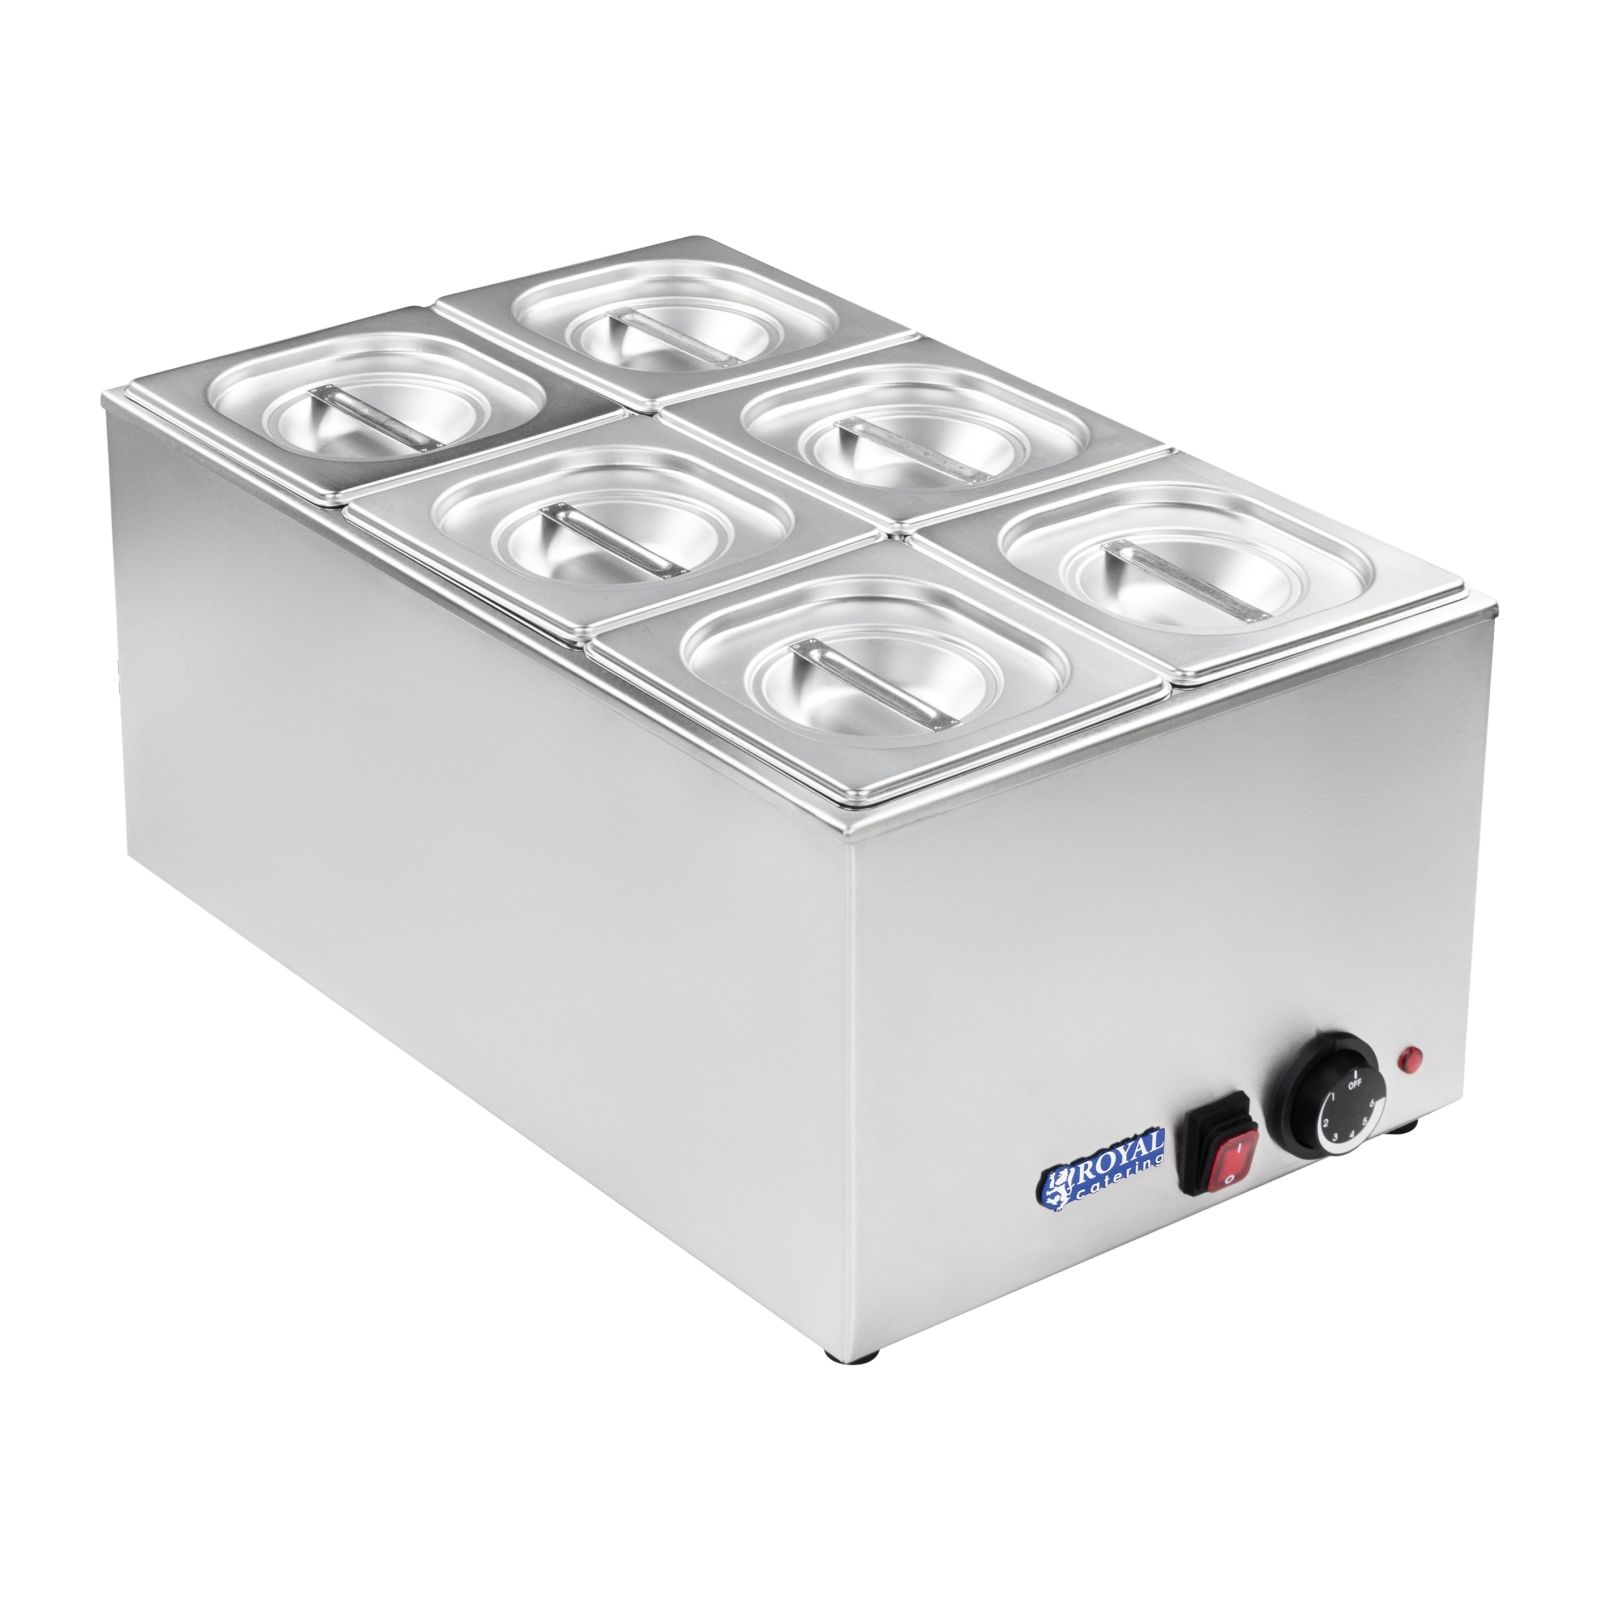 Royal Catering Bain-Marie - GN Behälter - 1/6 10010193